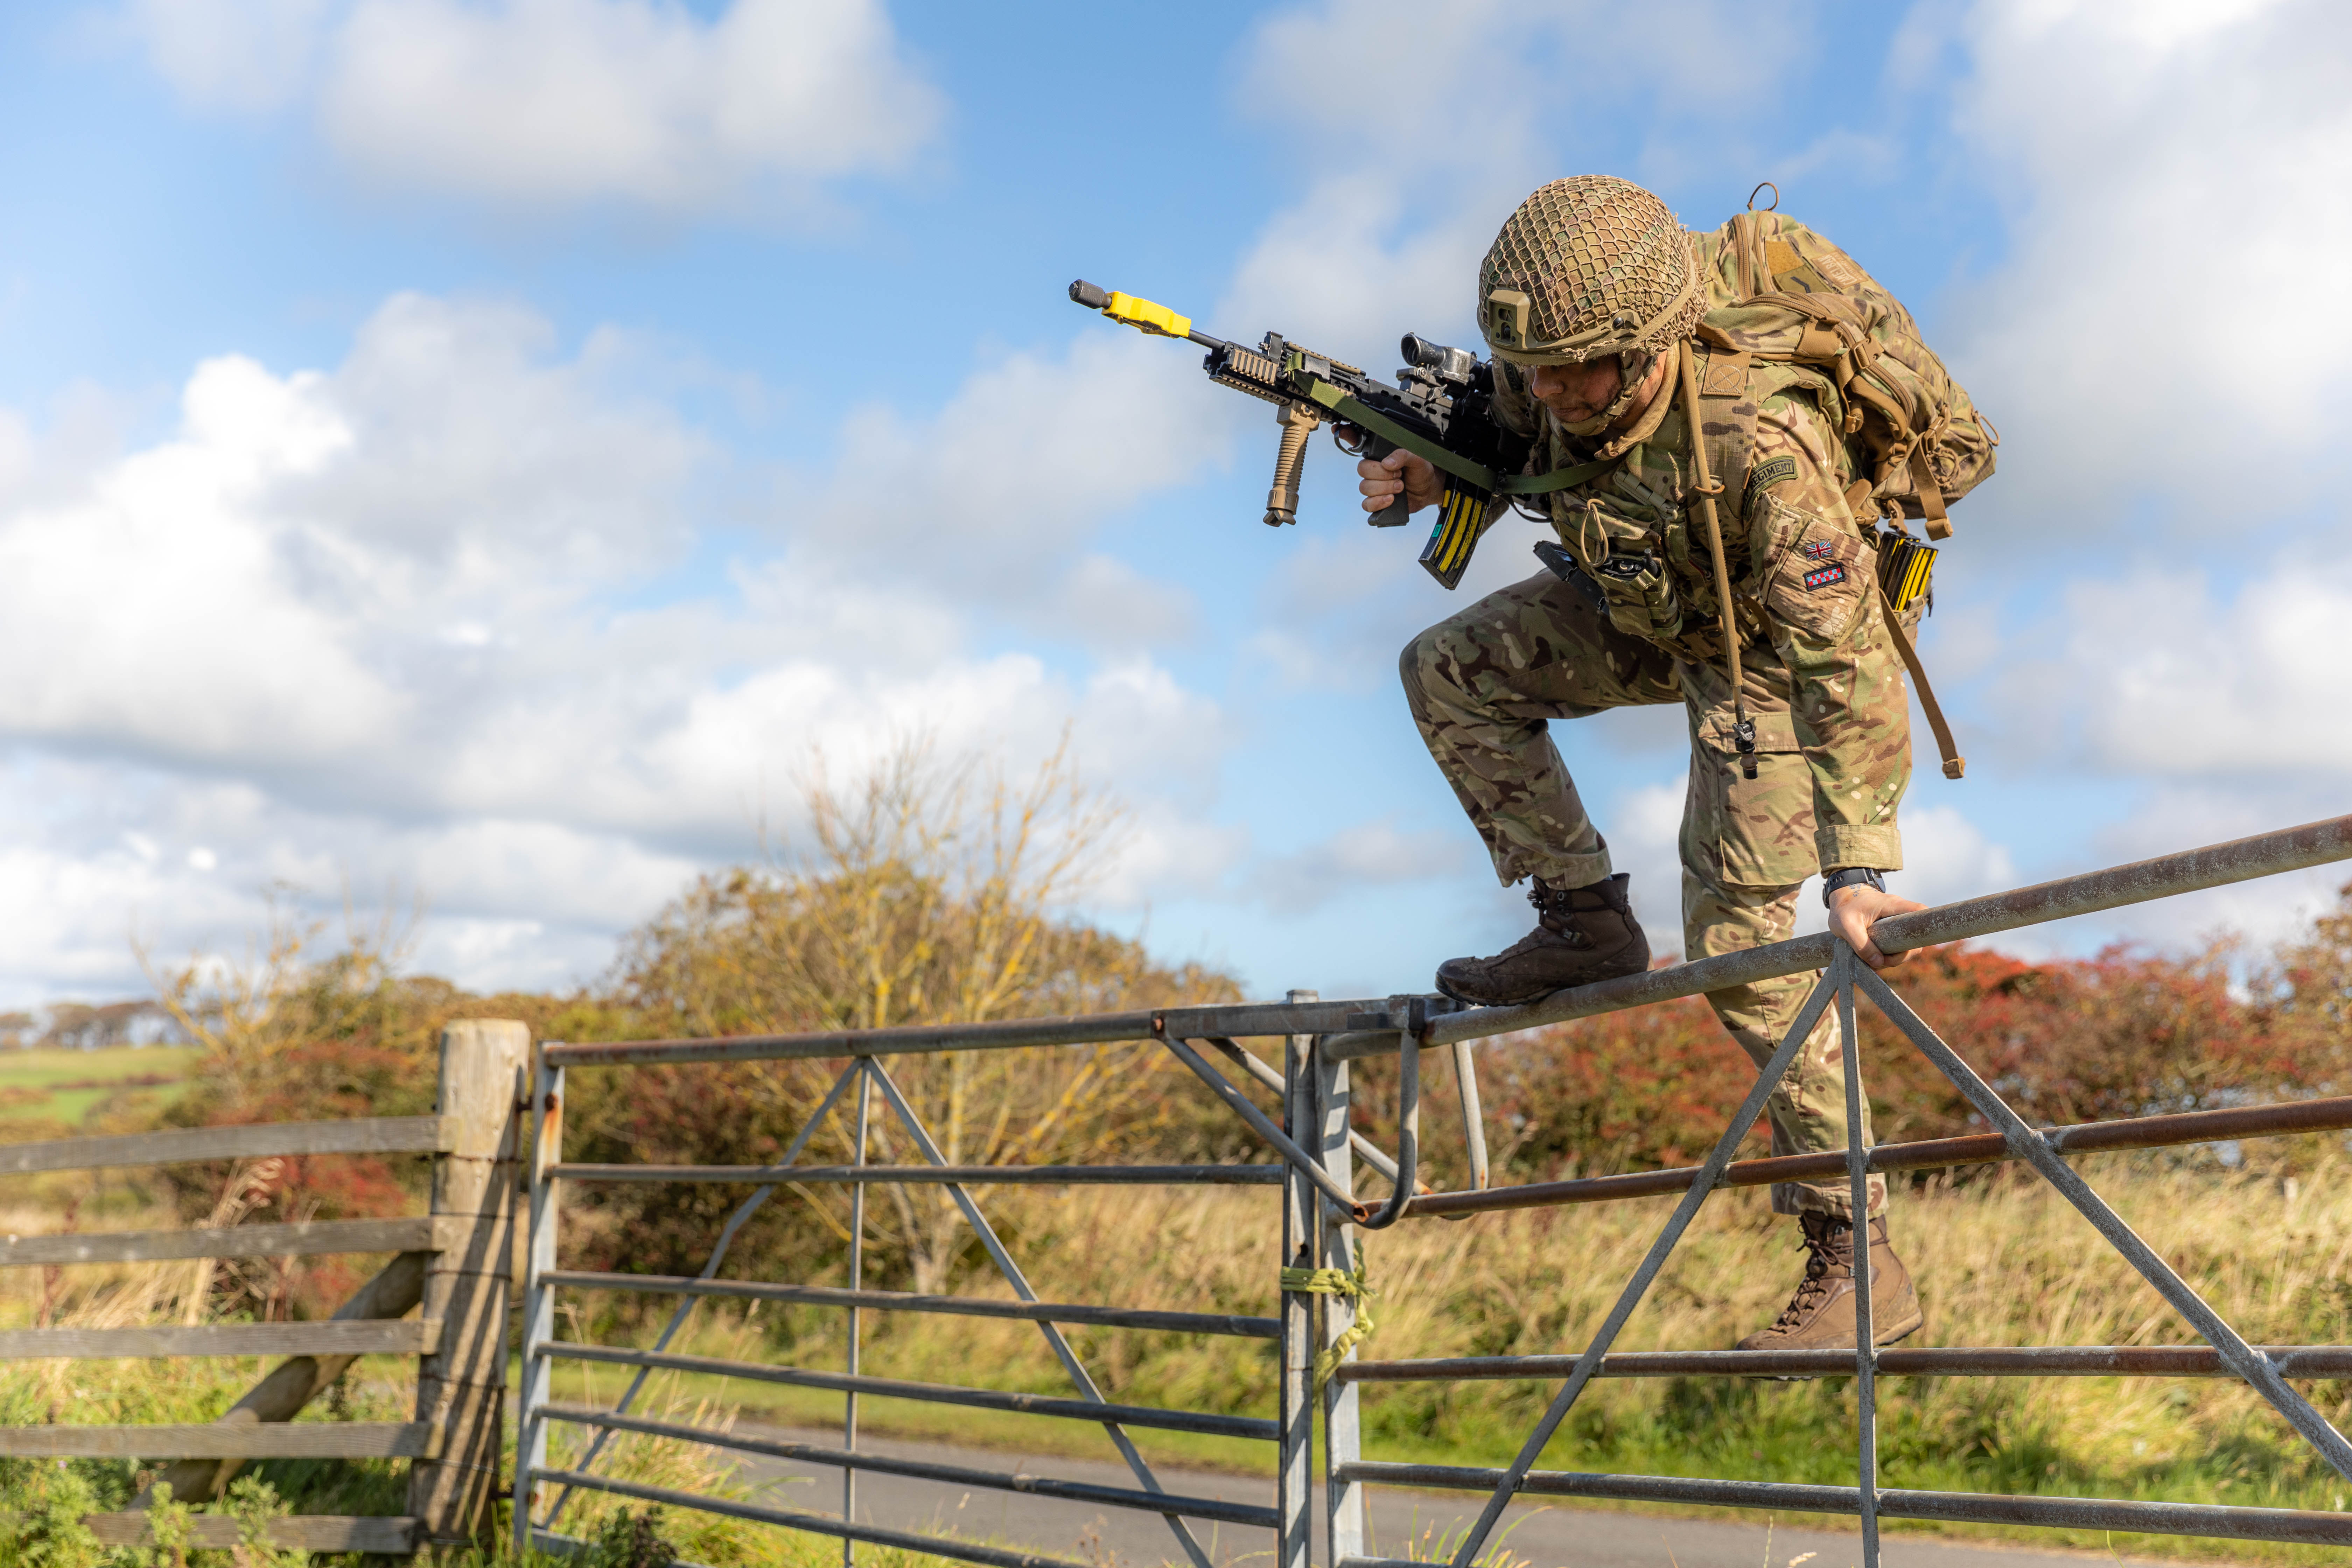 Soldier jumping over a farm gate, carrying a rifle